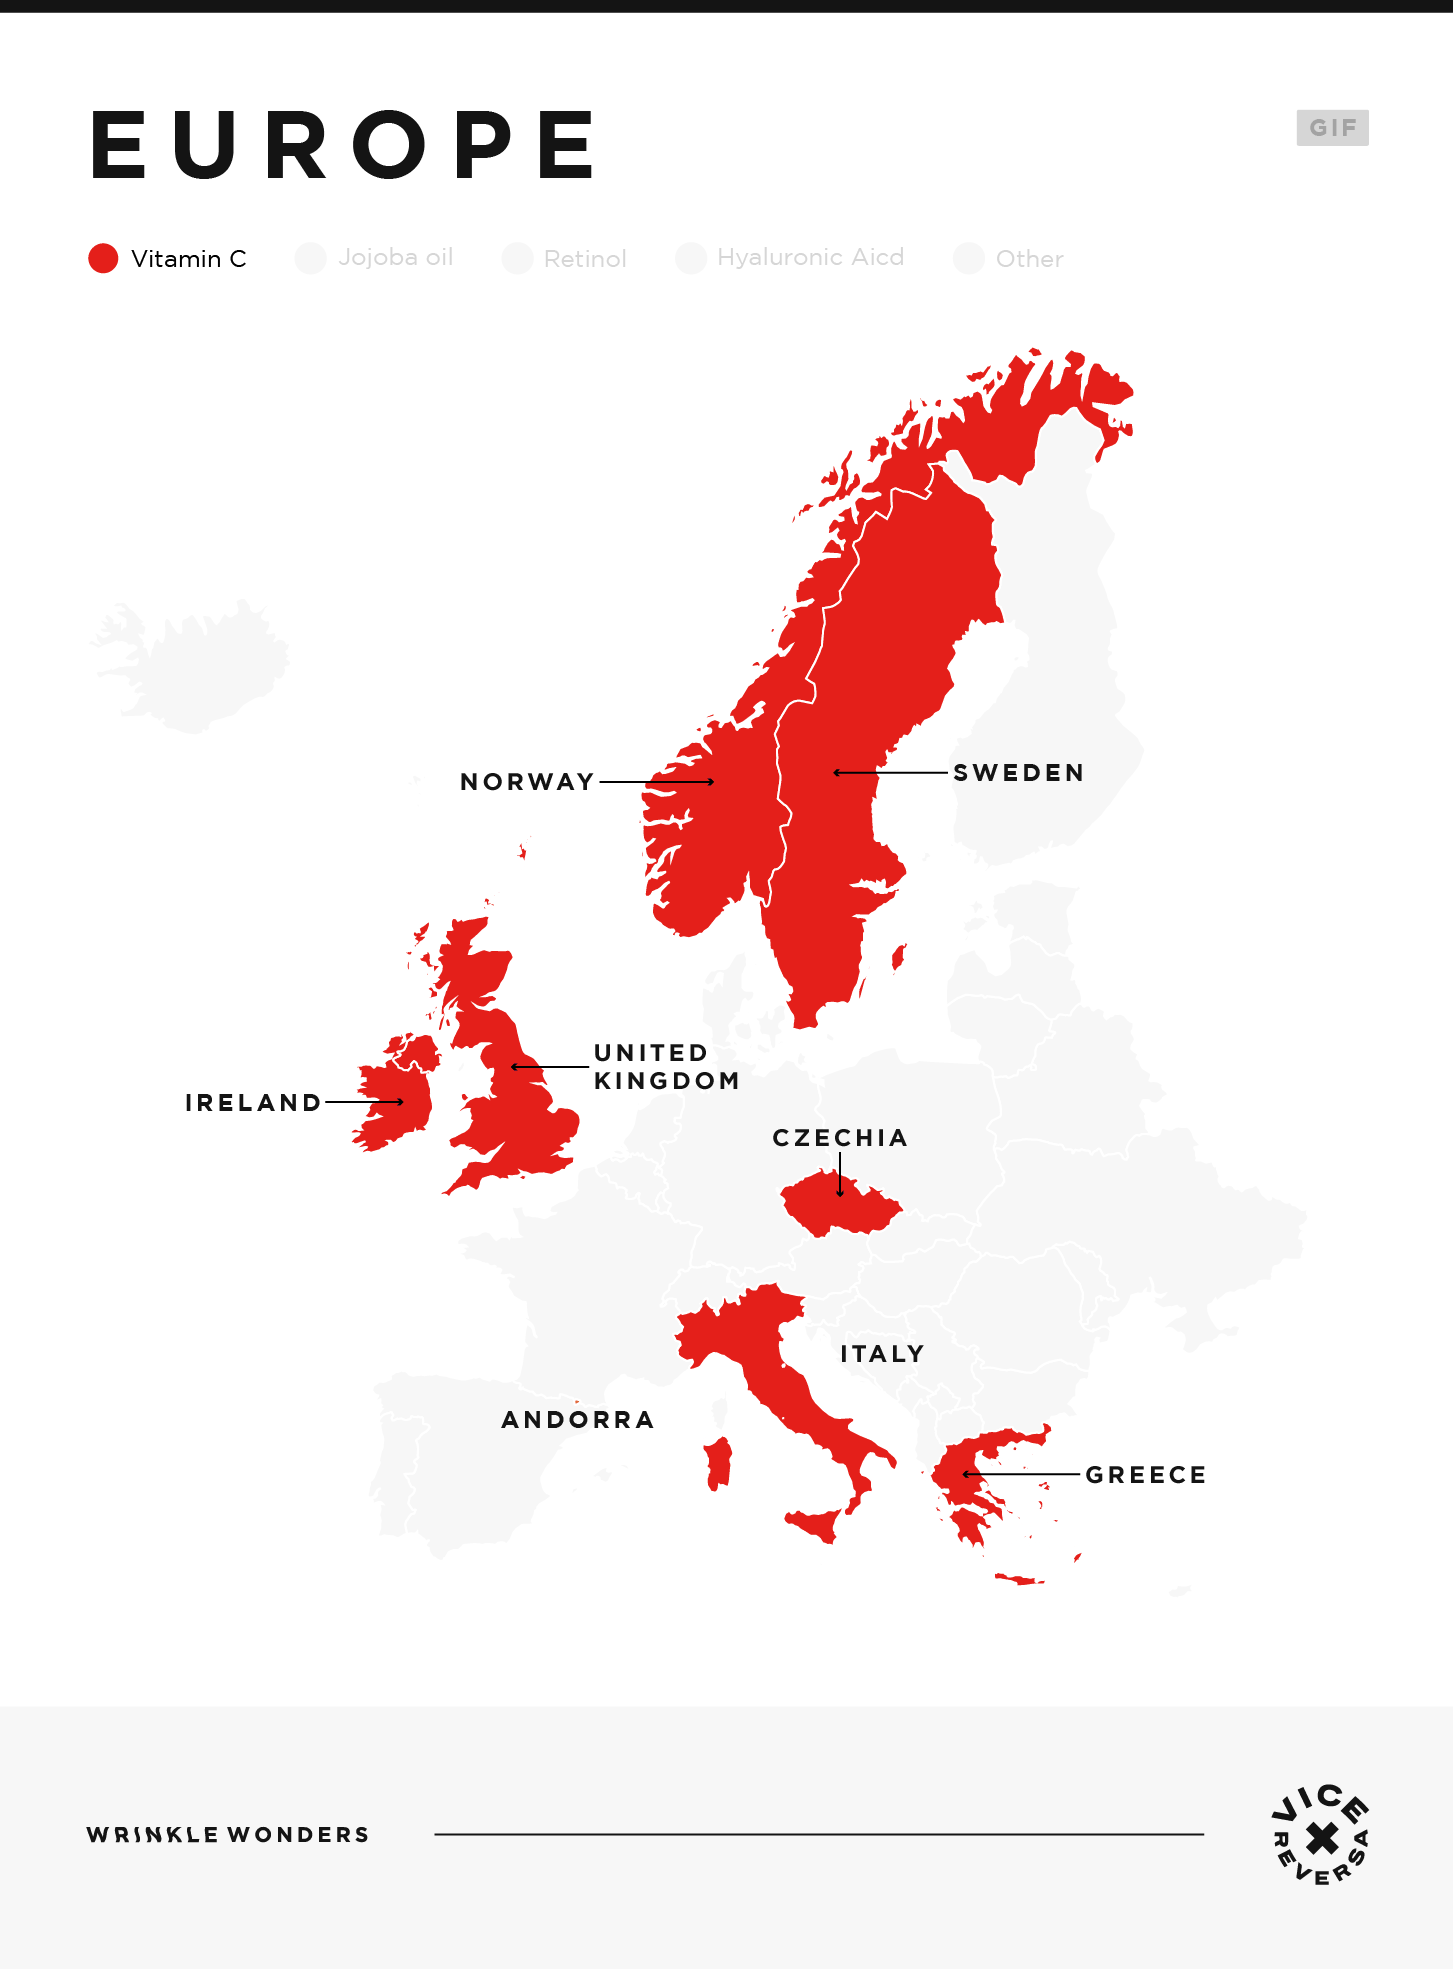 An interactive map showing the most searched for anti-wrinkle products in Europe.